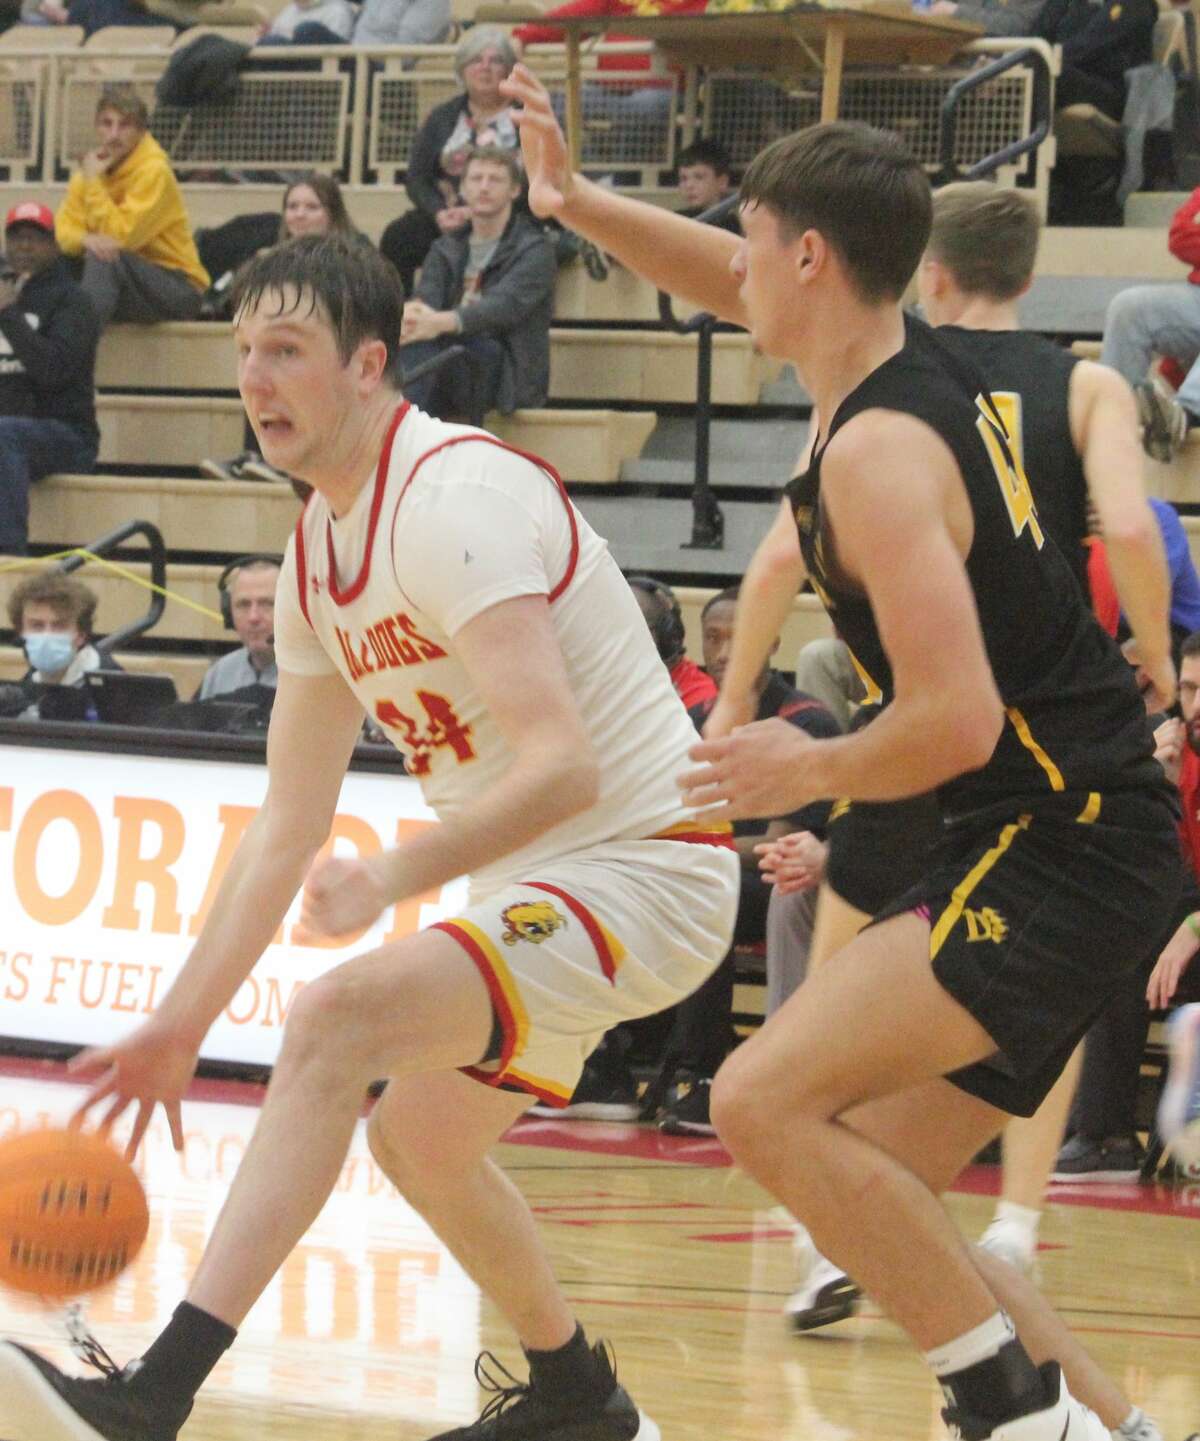 Ferris State's men's basketball team will have two key games this week at Saginaw Valley and Wayne State.